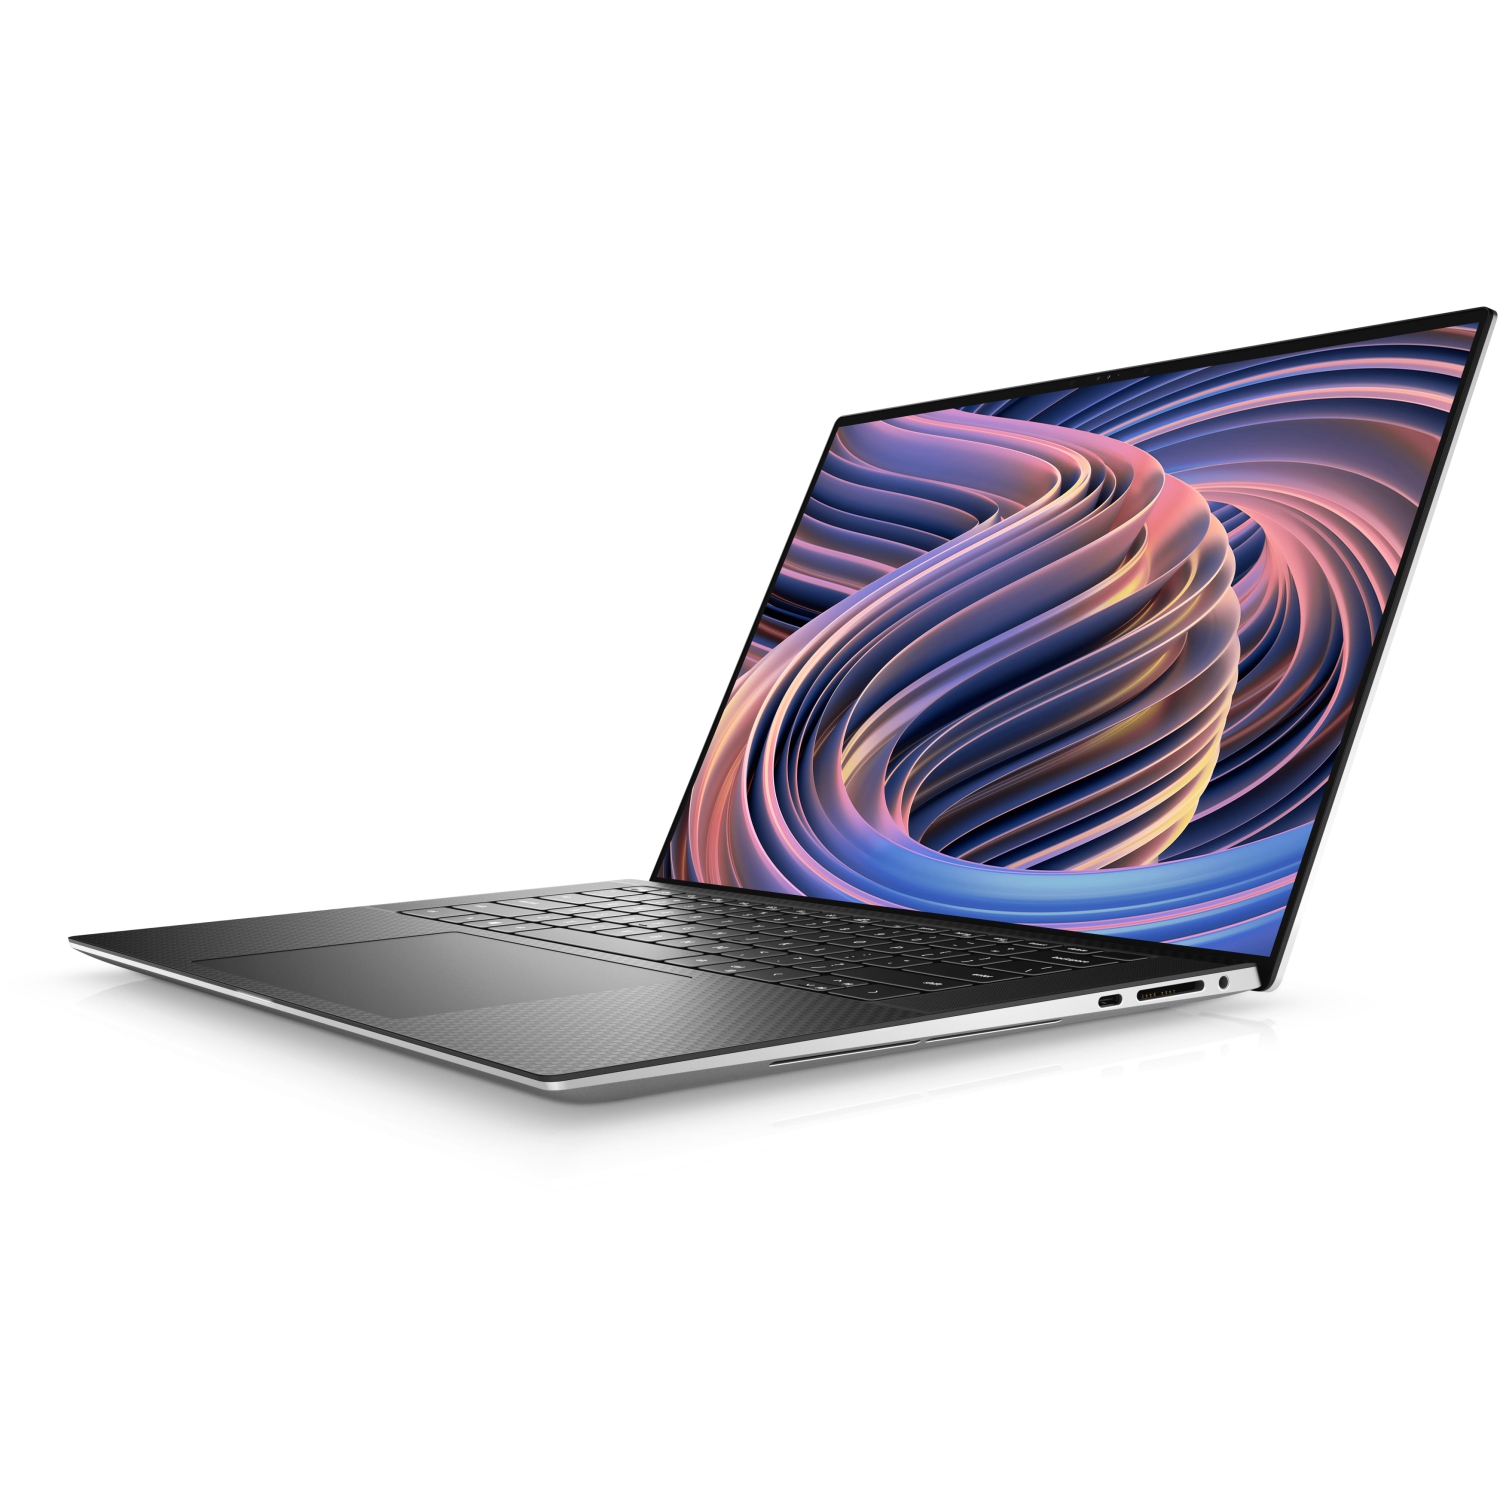 Refurbished (Excellent) – Dell XPS 9520 Laptop (2022) | 15.6" FHD+ | Core i7 - 2TB SSD - 48GB RAM - RTX 3050 | 14 Cores @ 4.7 GHz - 12th Gen CPU